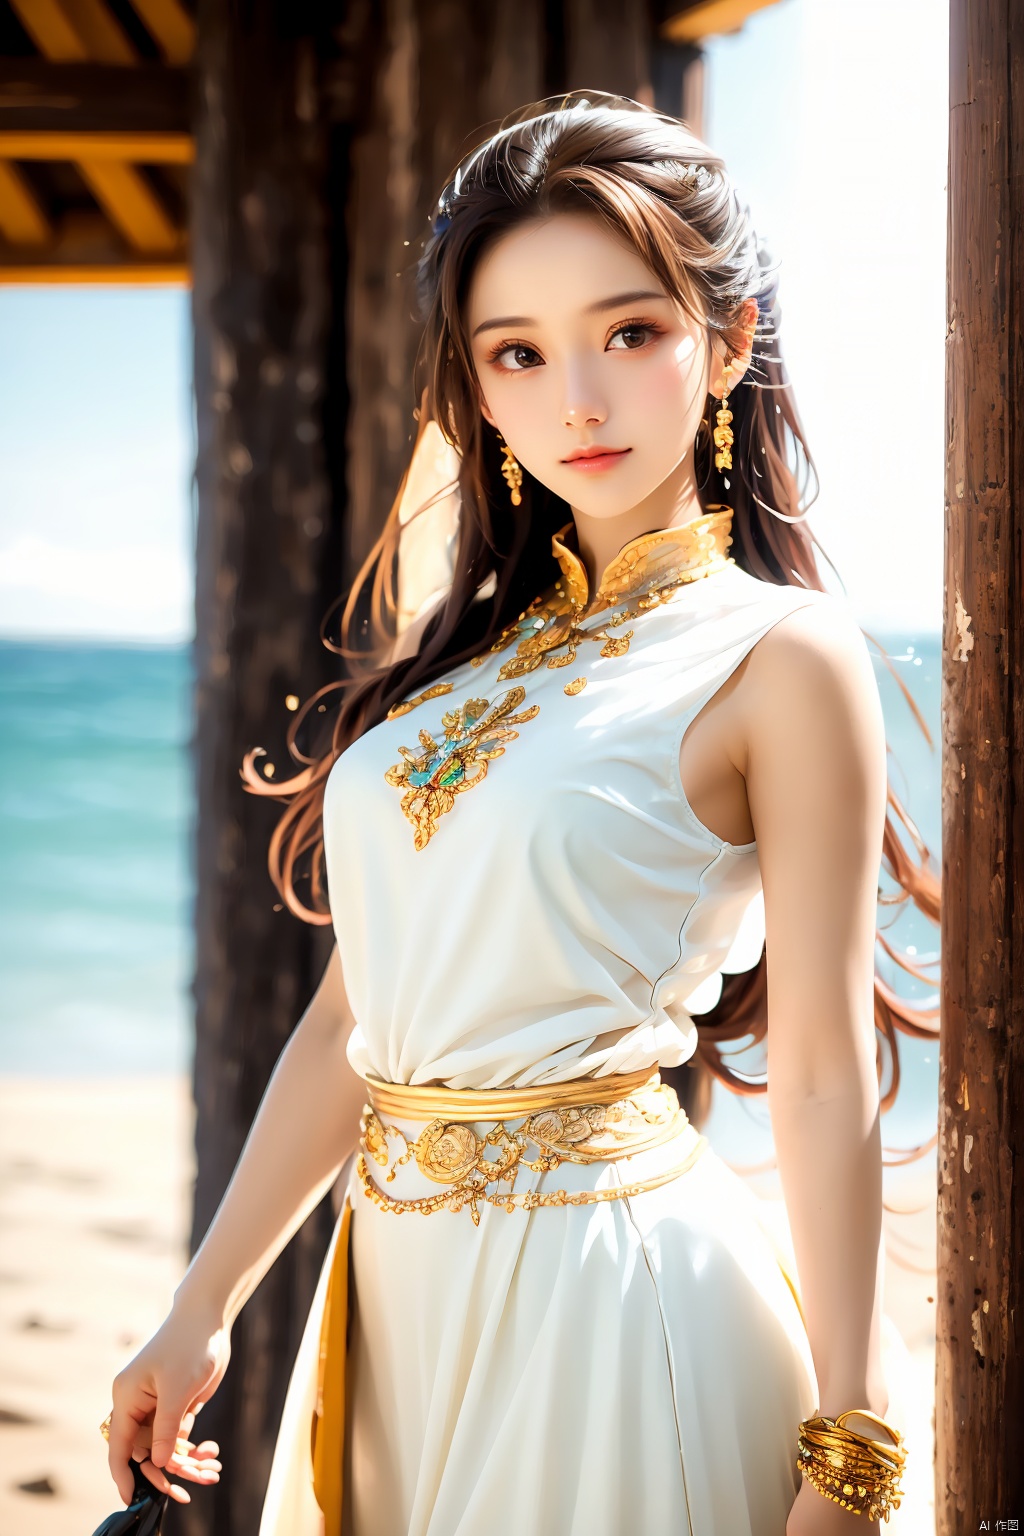 1 girl, (bright eyes, skin kissed by sunlight, carefree expression), fashion, (upper body wrapped in white, lower body colored long skirt), playful posture, smile, plump body, slender legs, young girl's body proportion, beach background, lighthouse, soft sea breeze, dynamic composition, prime time lighting, blurred background, rich colors, fine details, surrealism, 50mm lens, relaxed atmosphere. Portrait photography, 35mm film, naturally blurry, ((poakl)), , dunhuang